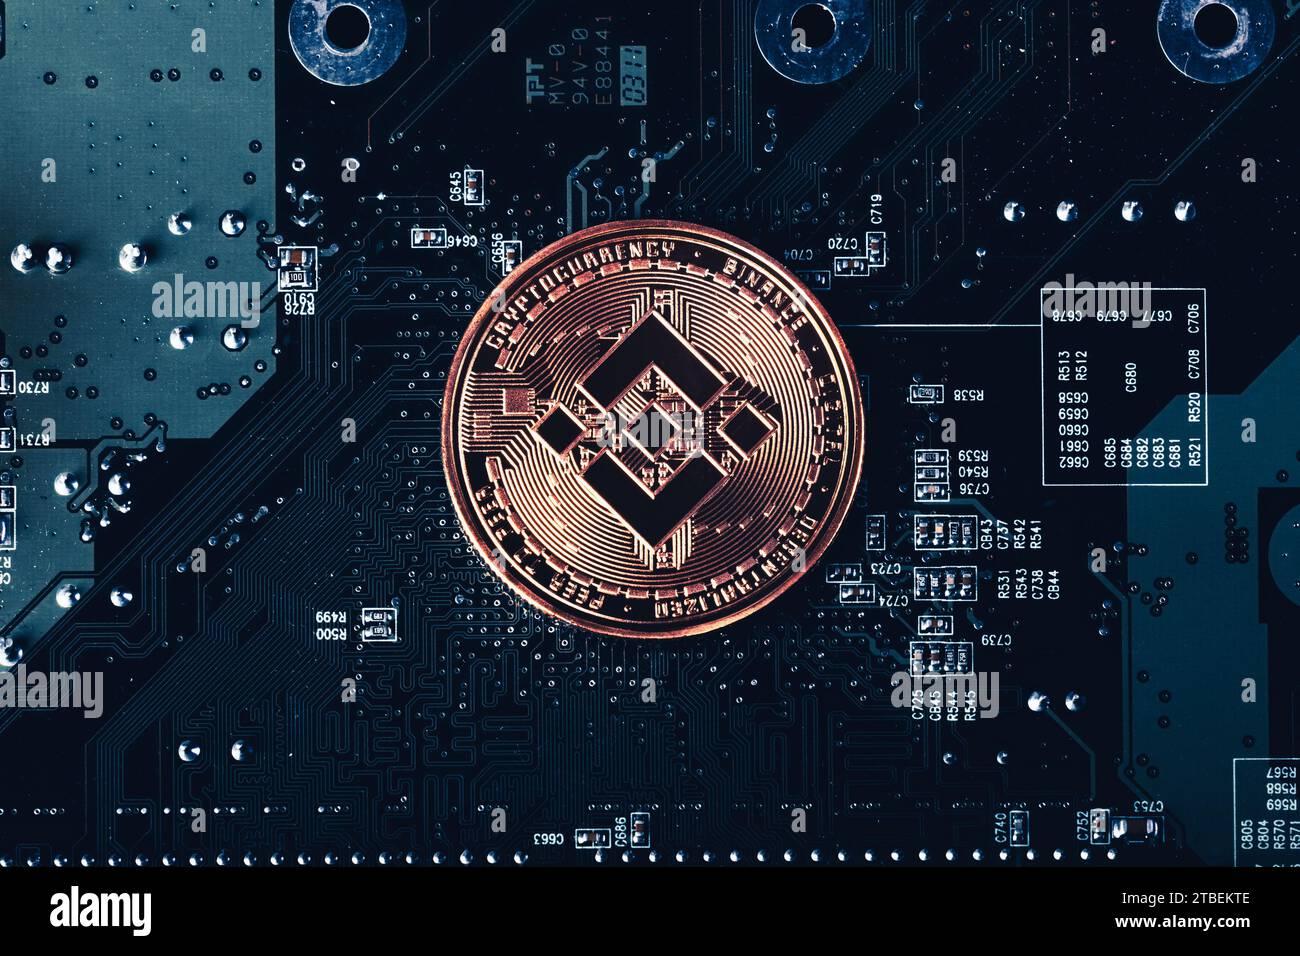 Binance BNB cryptocurrency token coin against circuit board background Stock Photo